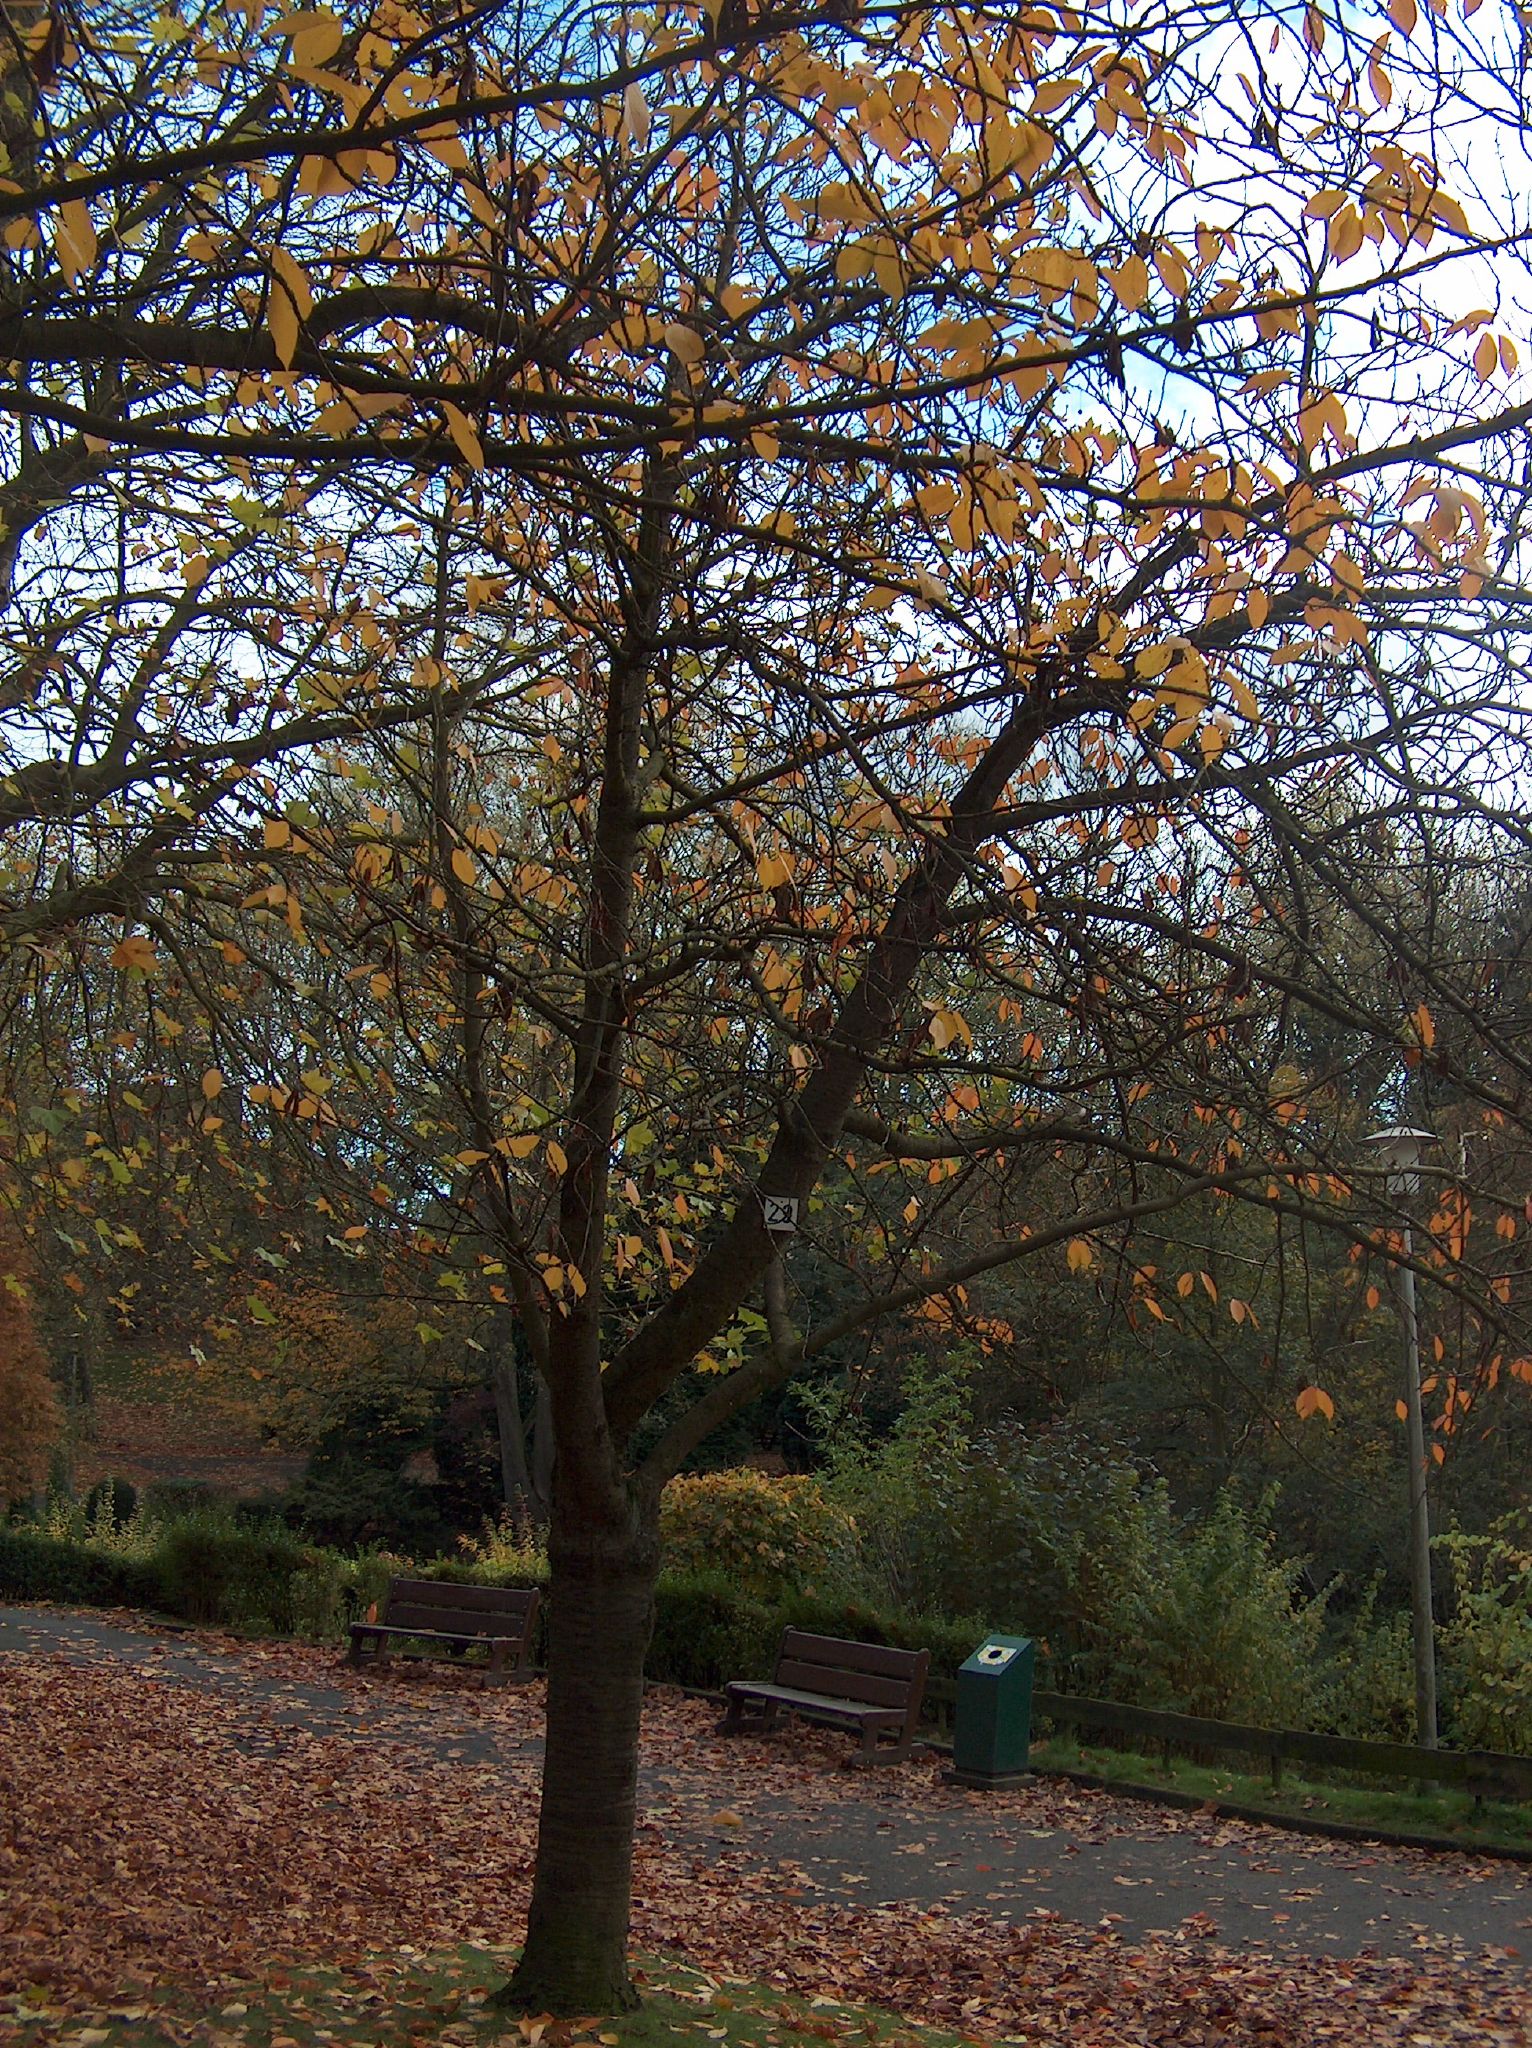 trees in a park with yellow leaves in the park